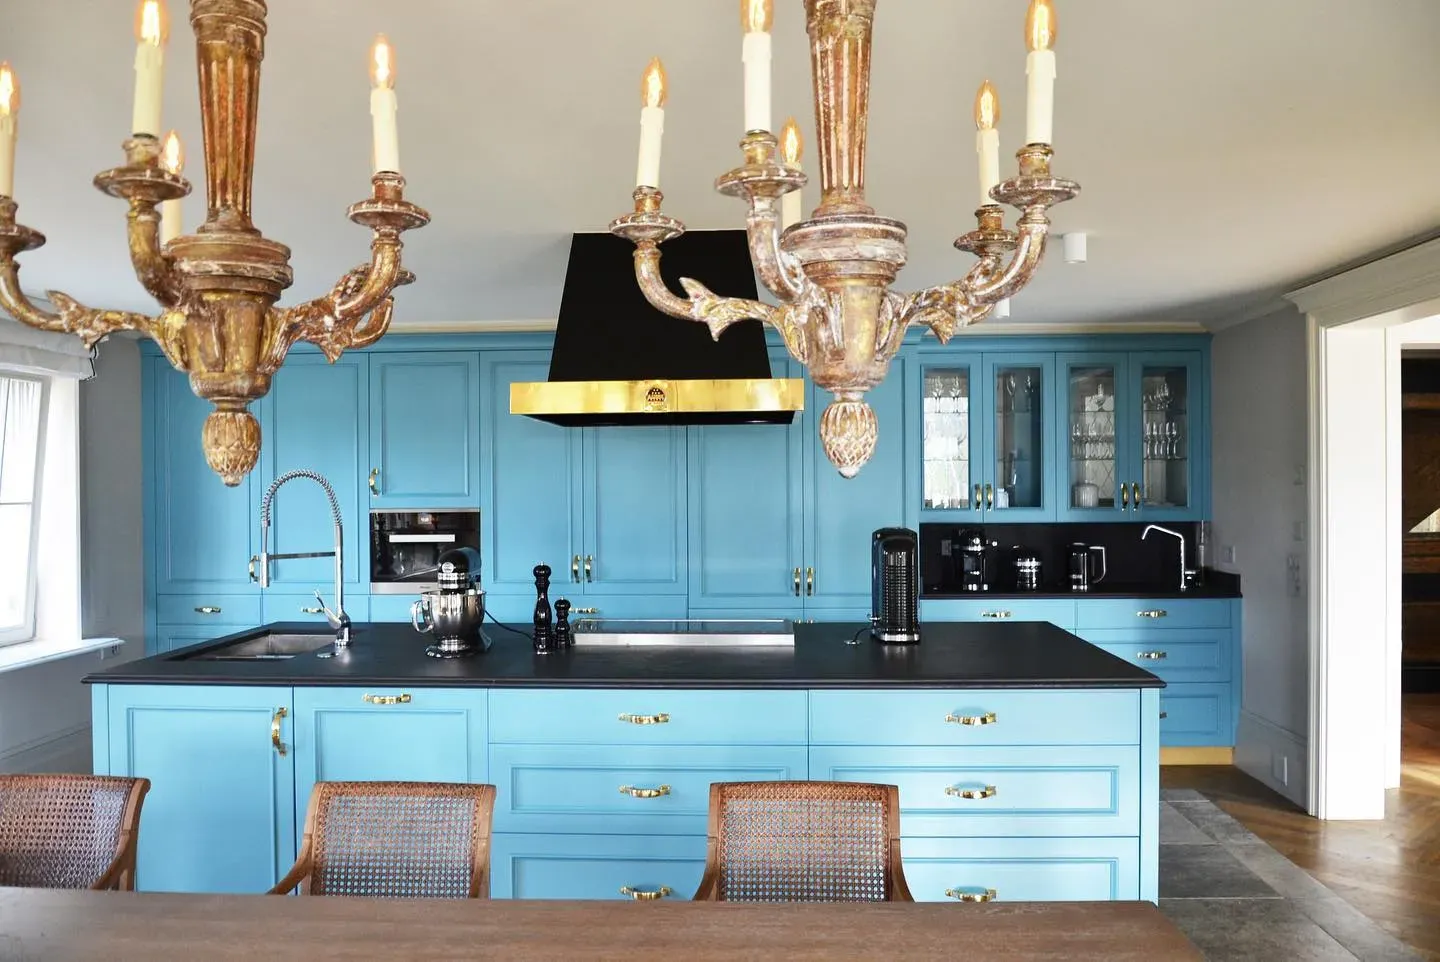 Farrow and Ball Blue Ground kitchen cabinets color